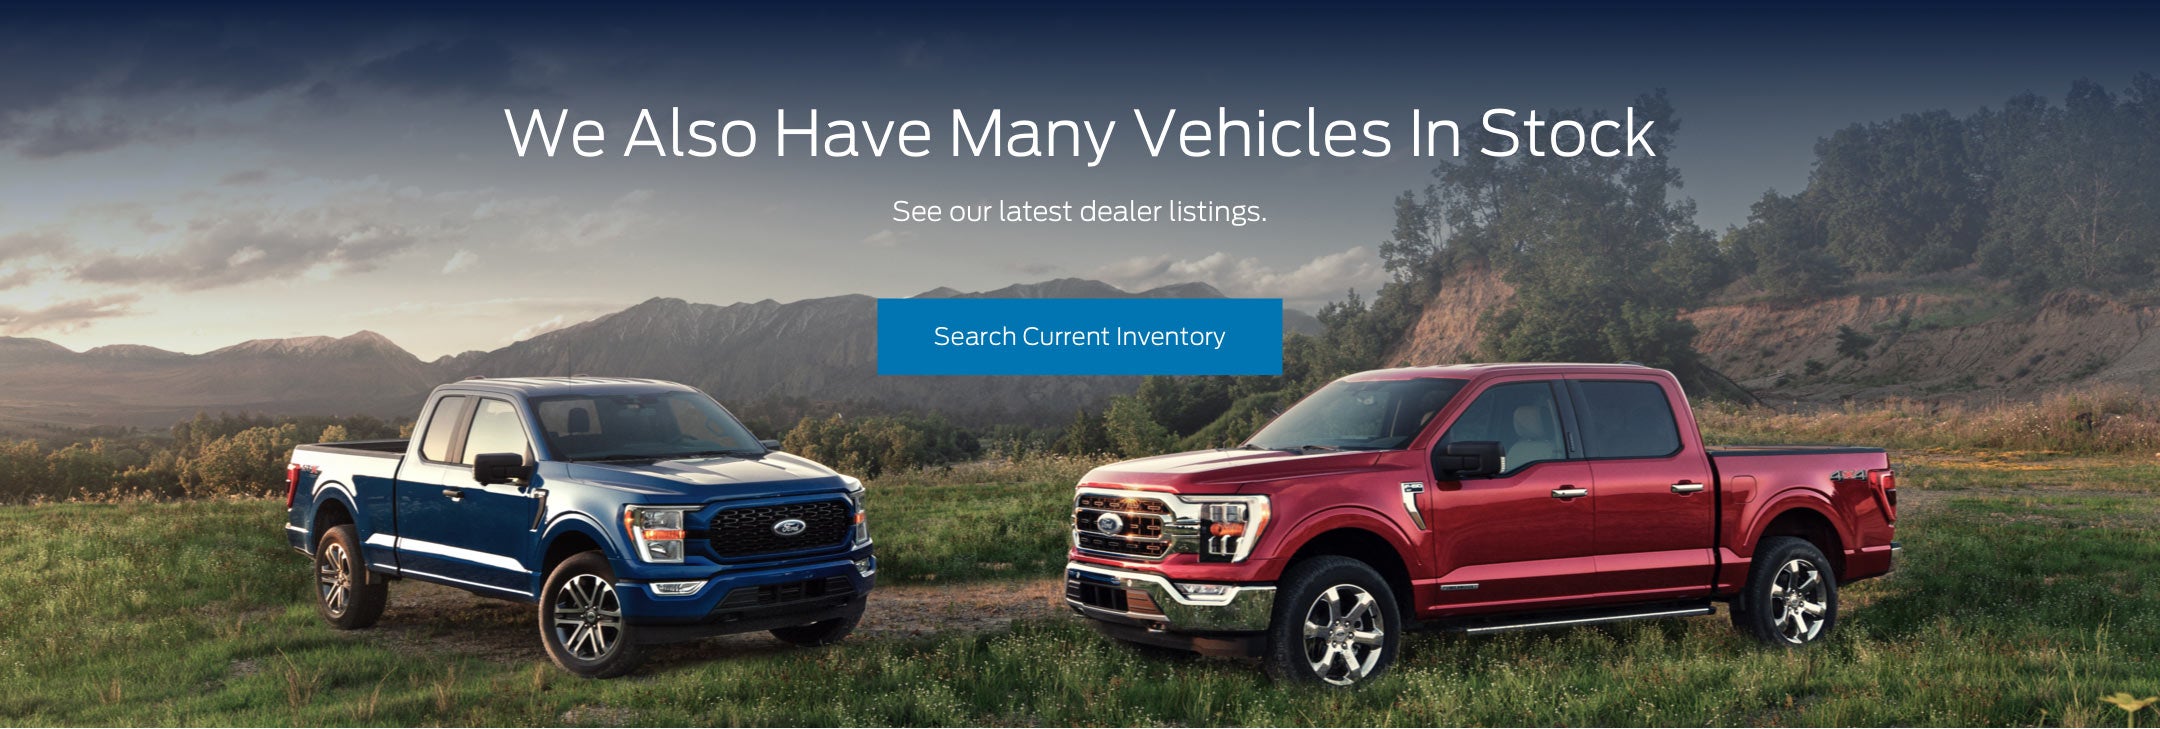 Ford vehicles in stock | Tri-County Ford in Mabank TX